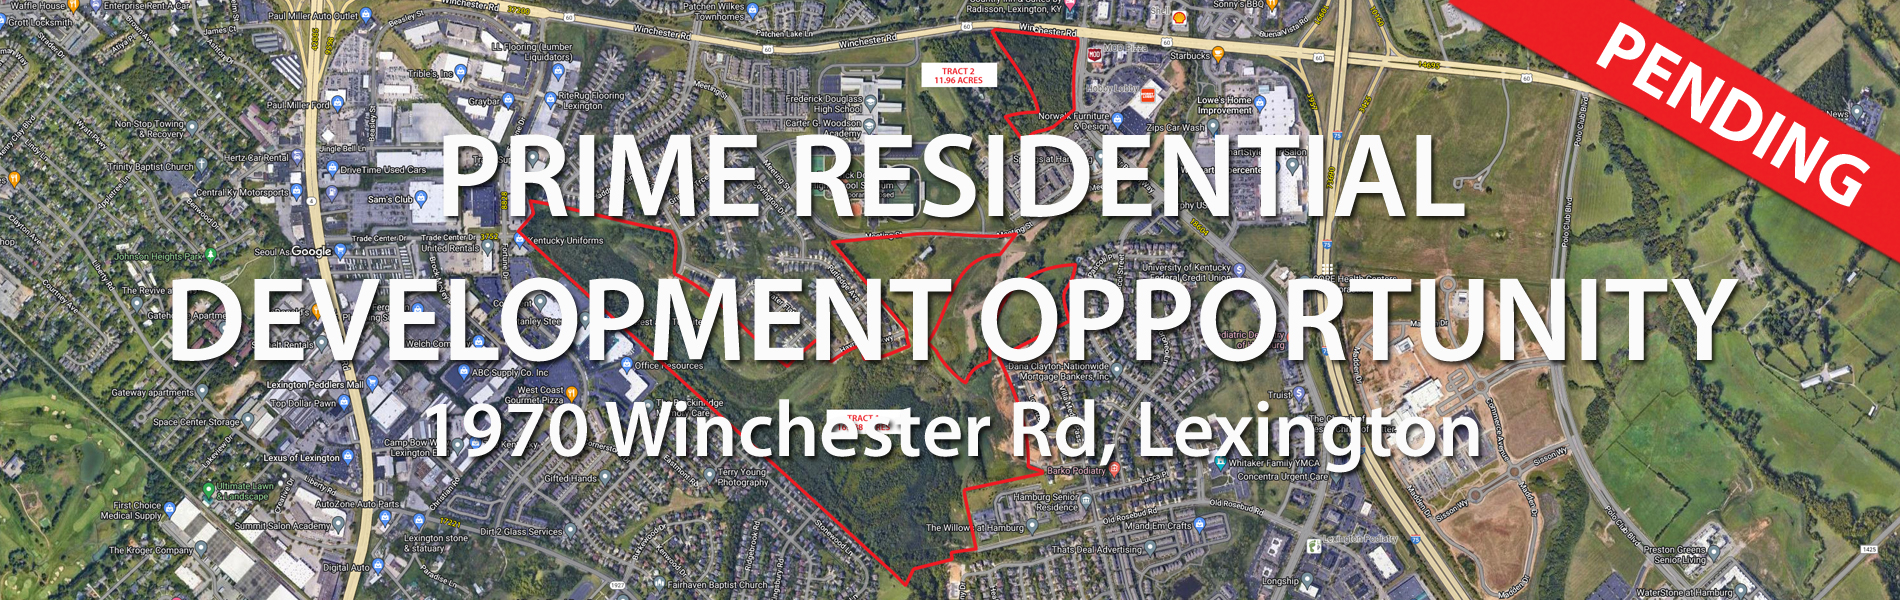 Prime Resindential Development Land Opportunity at 1970 Winchester Road